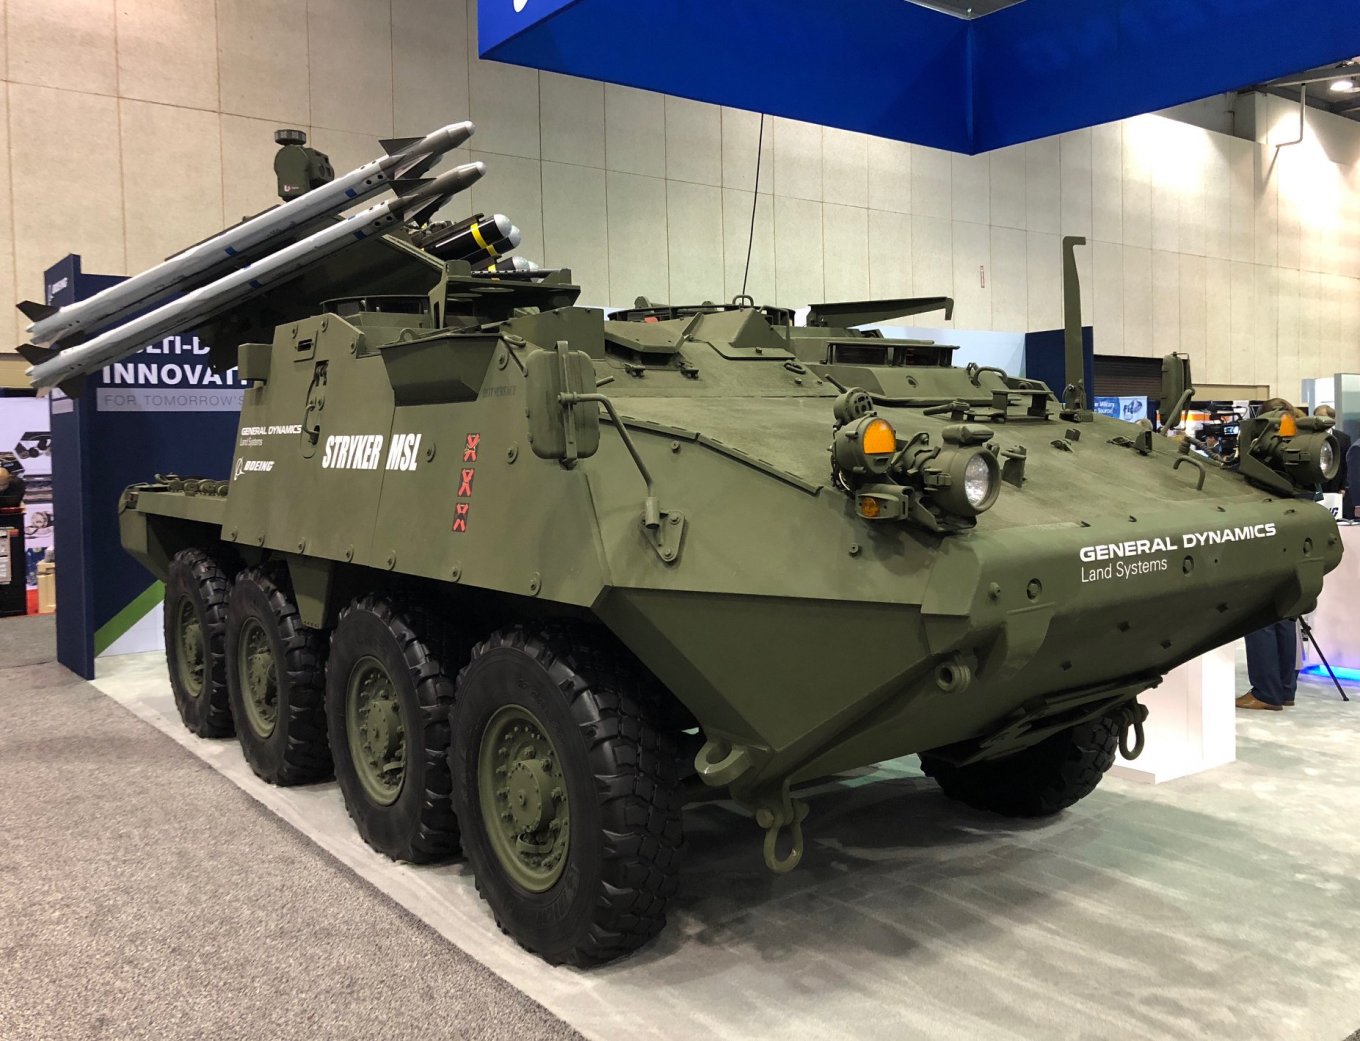 Stryker MSL armed with AIM-9X missiles